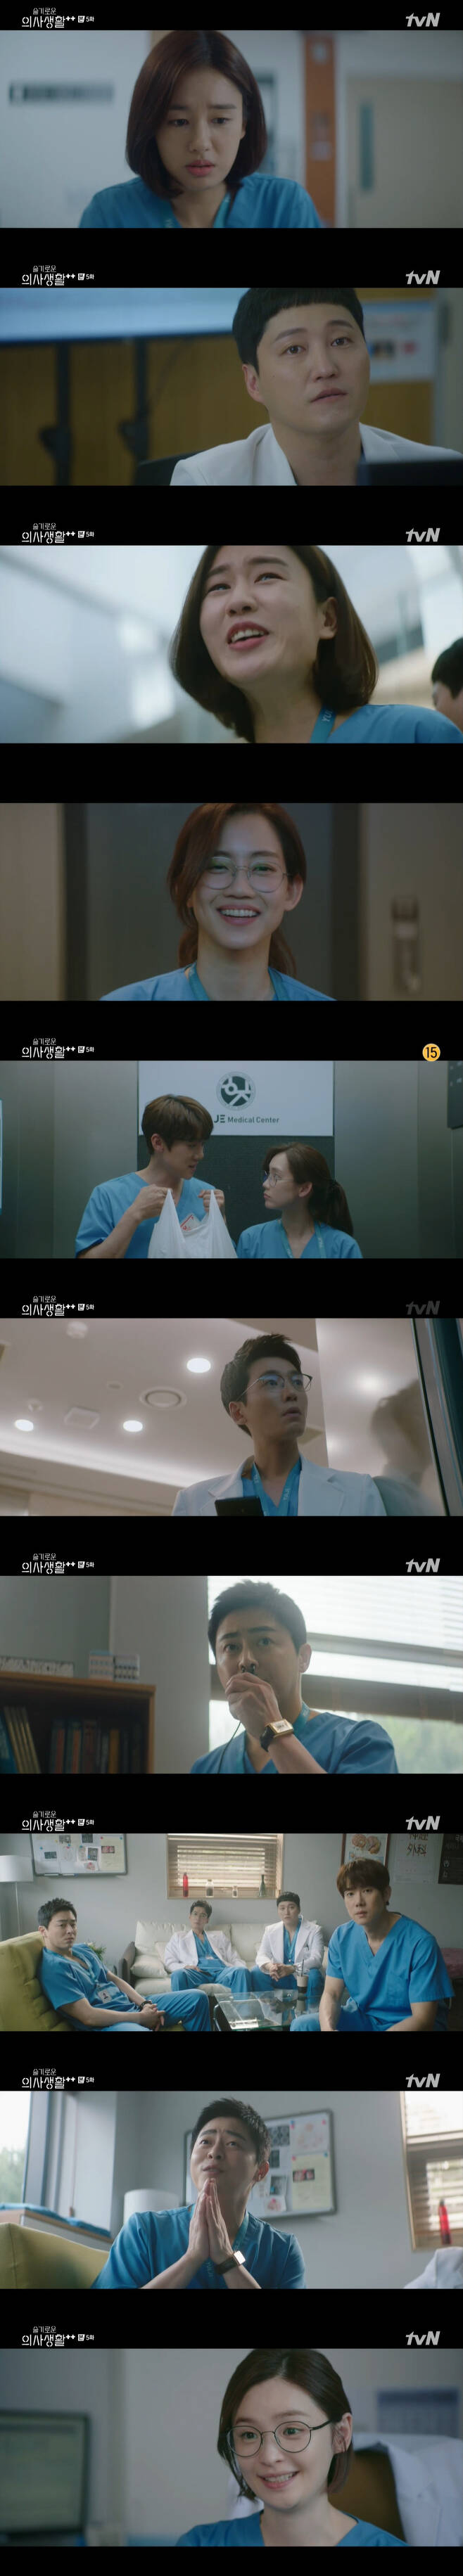 Sweetness 2.In TVNs Spicy Doctors Life Season 2 broadcast on the 15th, Lee Ik-jun (Jo Jung-suk) was shown to know between Lee Ik-soon (Kwak Sun-young) and Kim Joon-wan (Jung Kyung-ho).On this day, Lee said, I should never talk to Jun Wan, after telling Lee that he was sick.Lee Ik-jun, who returned home, recalled Lee Ik-sun, who said, Im sorry I didnt tell you. I started dating last summer.I do not know my brother, Jun Wan, who is sick, he said. I am sorry, he said.Chae Song-hwa (Jeonmido Boone) called his friends on an emergency call; Yang Seok-hyung (Kim Dae-myung Boone) said, Do you marry? and Chae Song-hwa said, Its as important as marriage.The boss of the sushi restaurant, who often goes to Sokcho, said if you need it, you will give it wholesale. I ordered 10, and when I arrived at Weekend, Seok-hyung asked me to send him home, it was fasting eight hours ago, Chae Song-hwa said, surprising 99s.Ahn Jung-won (Yoo Yeon-seok) had a date with a crab in the early winter (Shin Hyun-bin) and said, Please promise me one thing.If anything happens, whether its big or small, tell me everything, he said. I do not know, but I will not nag you.Then, in the winter, Professor promise me, he said, I would like you to express your affection once in Haru.An Jeong-won smiled brightly, and the two kissed and showed their affection.Yang Seok-hyung (Kim Dae-myung) smiled when she saw her husband taking his wife first rather than her child after giving birth.I realized that marriage is not just a bad thing, Yang said to Chae Song-hwa, who came to him. I went to my wife before the baby.I felt good and envious all the time.Chae Song-hwa said, Remarry. Yang Seok-hyung said, I should not marry. Do not you know my house? Chae Song-hwa said, What did you do? What did you do?Yang Seok-hyung said, Shin Ae was stressed by a coma before marriage, and after marriage, her mother called Haru 30 times.I wanted to get in trouble, so I said I was going to study abroad, but I was asked why I had my daughter study with my sons money. I was depressed and I thought it was a good idea to stay in my family, but it was not good, he said. I went home to be a daughter-in-law, but I saw her taking a ring from her dressing table.I thought it was best to pretend not to know. Its not an effort, its an avoidance. Its an effort to ask why you stole it and fight it, Chae said. Ill give you a solution. Say a lot.Even if you have a useless word, it will not be useless, he said. Start with the closest person, the person you think most comfortably.At that time, a call came to Chu Min-ha (Ahn Eun-jin), and Yang Seok-hyung continued the story as Chae Song-hwa advised.Meanwhile, Lee Ik-jun waited while Lee Ik-sun returned to Korea for the inspection and headed for Changwon together. While Lee Ik-jun was away for a while, Lee Ik-sun waited alone in the car.Kim Joon-wan, who did not come to the hospital earlier, headed to the hospital because of work, and when he saw Lees car, he headed to the car.Lee Ik-sun, who watched this, shed tears, and at that moment Kim Joon-wan headed to the hospital at the call of Do Jae-hak (Jung Mun-sung).Chu Min-ah also said, Lets ask where you are going to department store. Its not like that. But its 100% green light to ask me that.I have a question from the professor, and I can do Confessions five times in the future, he said. I think you can let me do it if you do not feel uncomfortable.Yang Seok-hyung said, I do not feel uncomfortable, but I will refuse.I did not even have Confessions, but what if I refuse, he said. Can I make Confessions?Yang Seok-hyung said, It is free to do, and Chu Min-ha said, I will only be Confessions five times in the future. I like Professor a lot.Would you like to go to a movie in Weekend? But Yang Seok-hyung said, I decided to go to the temple with my mother in Weekend.